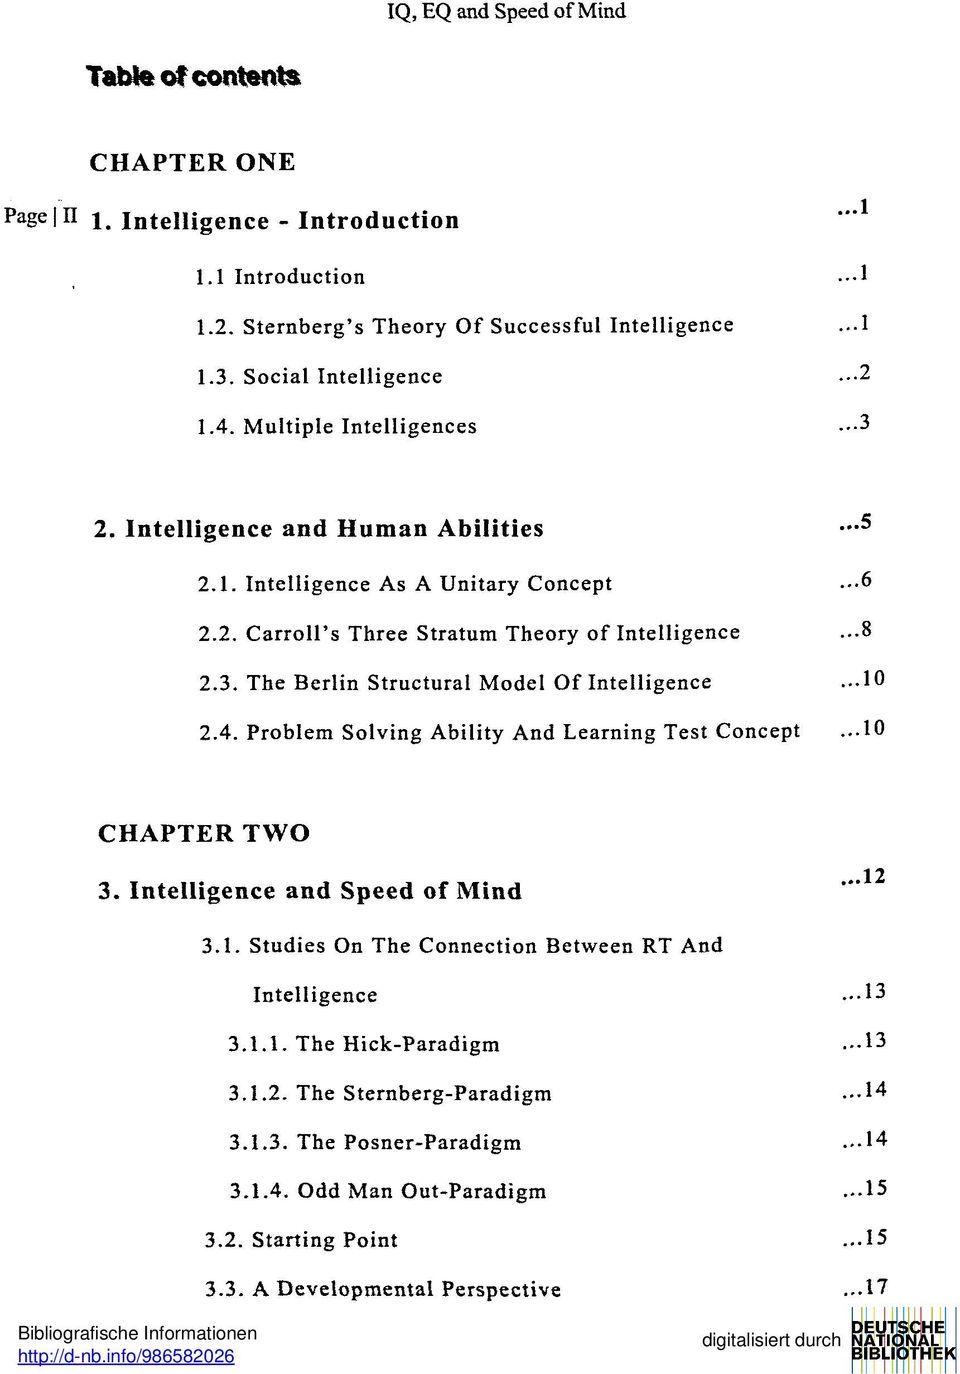 Problem Solving Ability And Learning Test Concept...5...6...8...10...10 CHAPTER TWO 3. Intelligence and Speed of Mind 3.1. Studies On The Connection Between RT And Intelligence 3.1.1. The Hick-Paradigm 3.